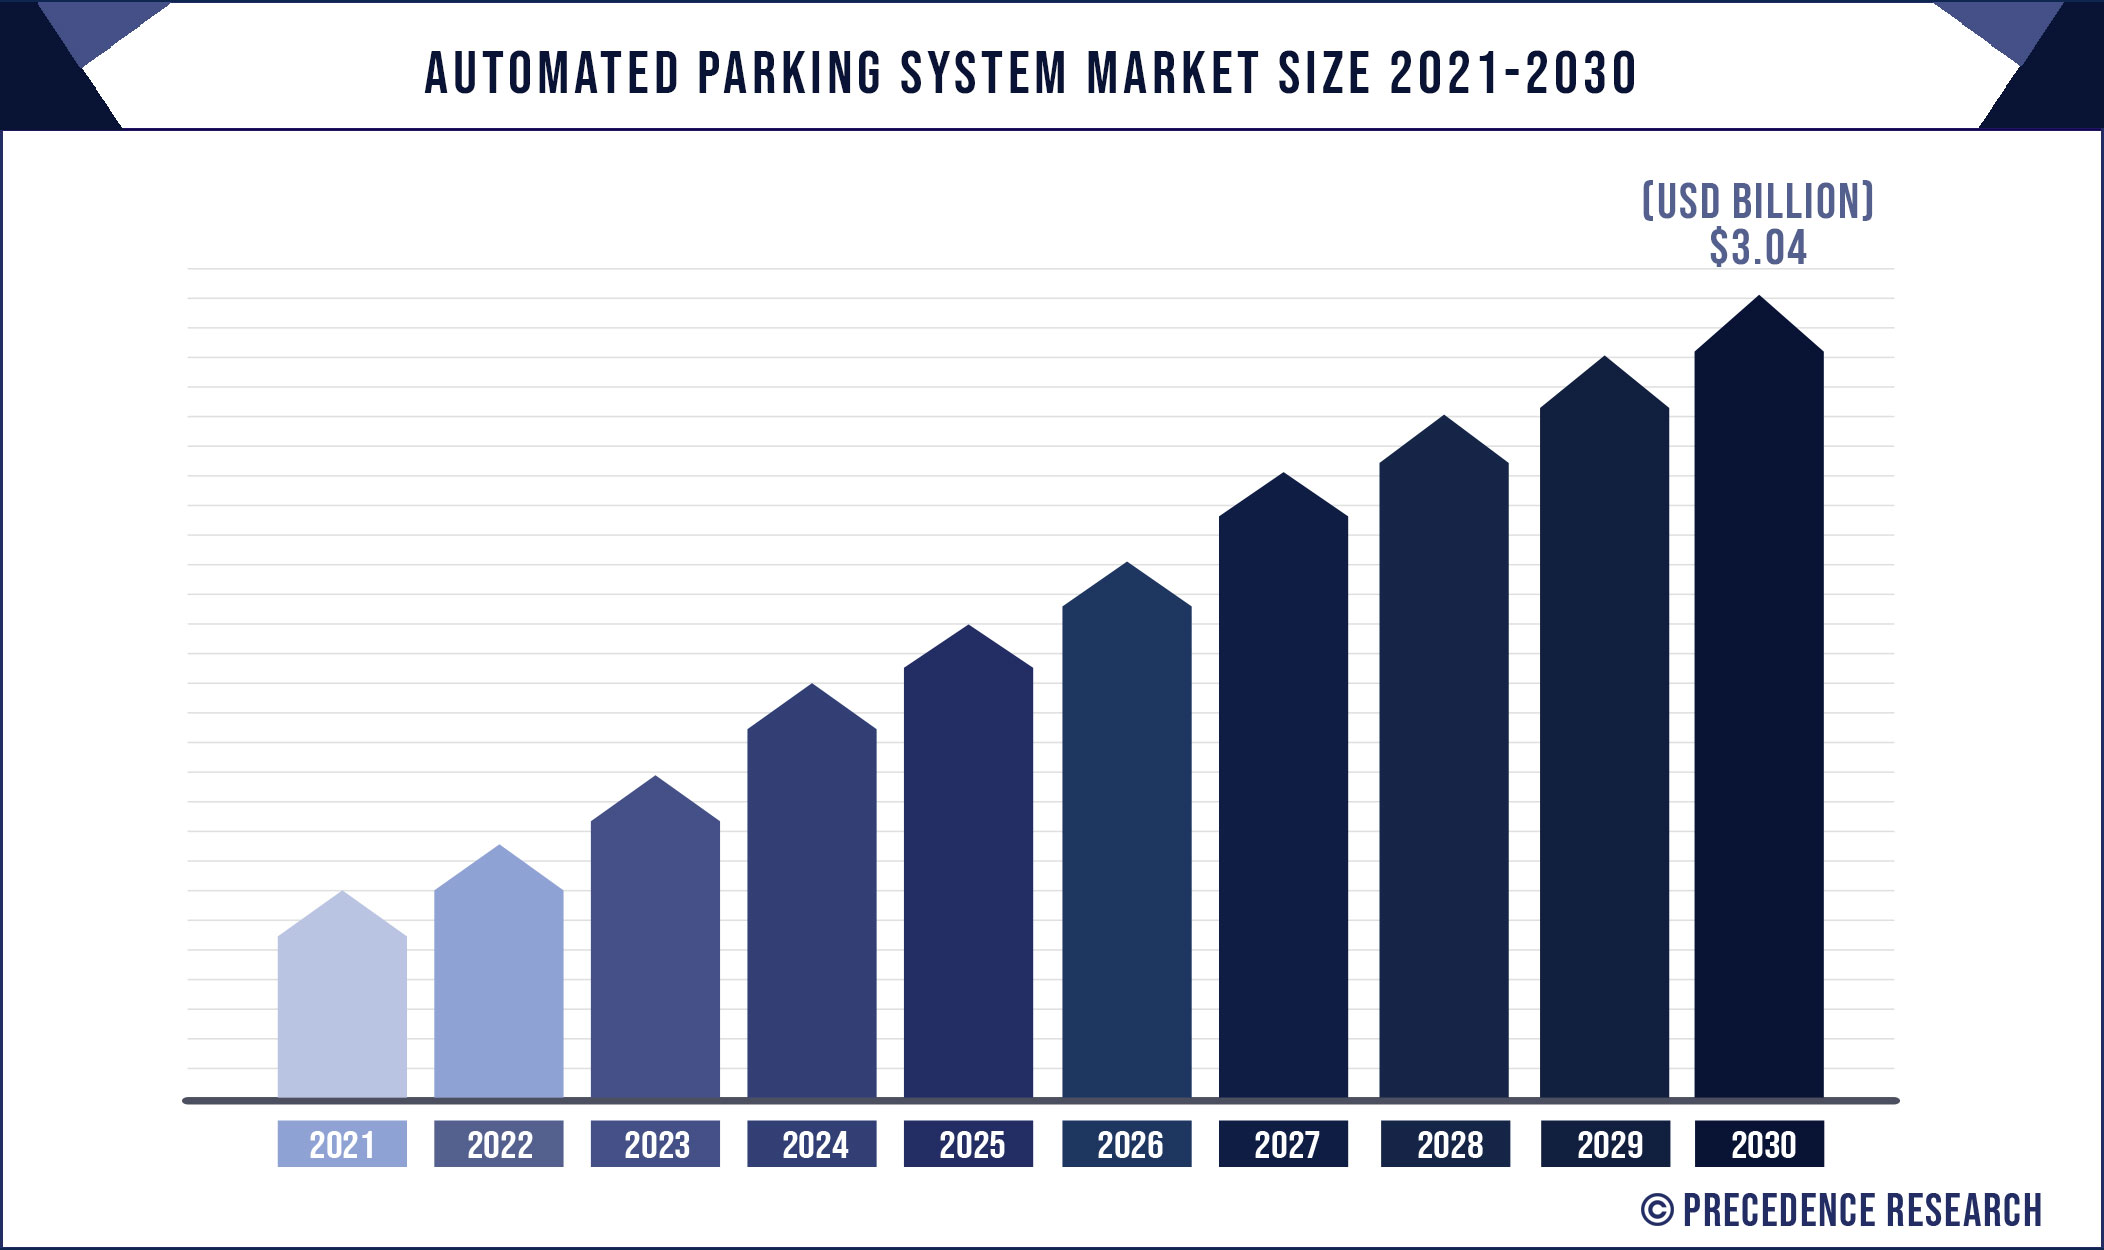 Automated Parking System Market Value to Boost at 8.9% CAGR through 2030